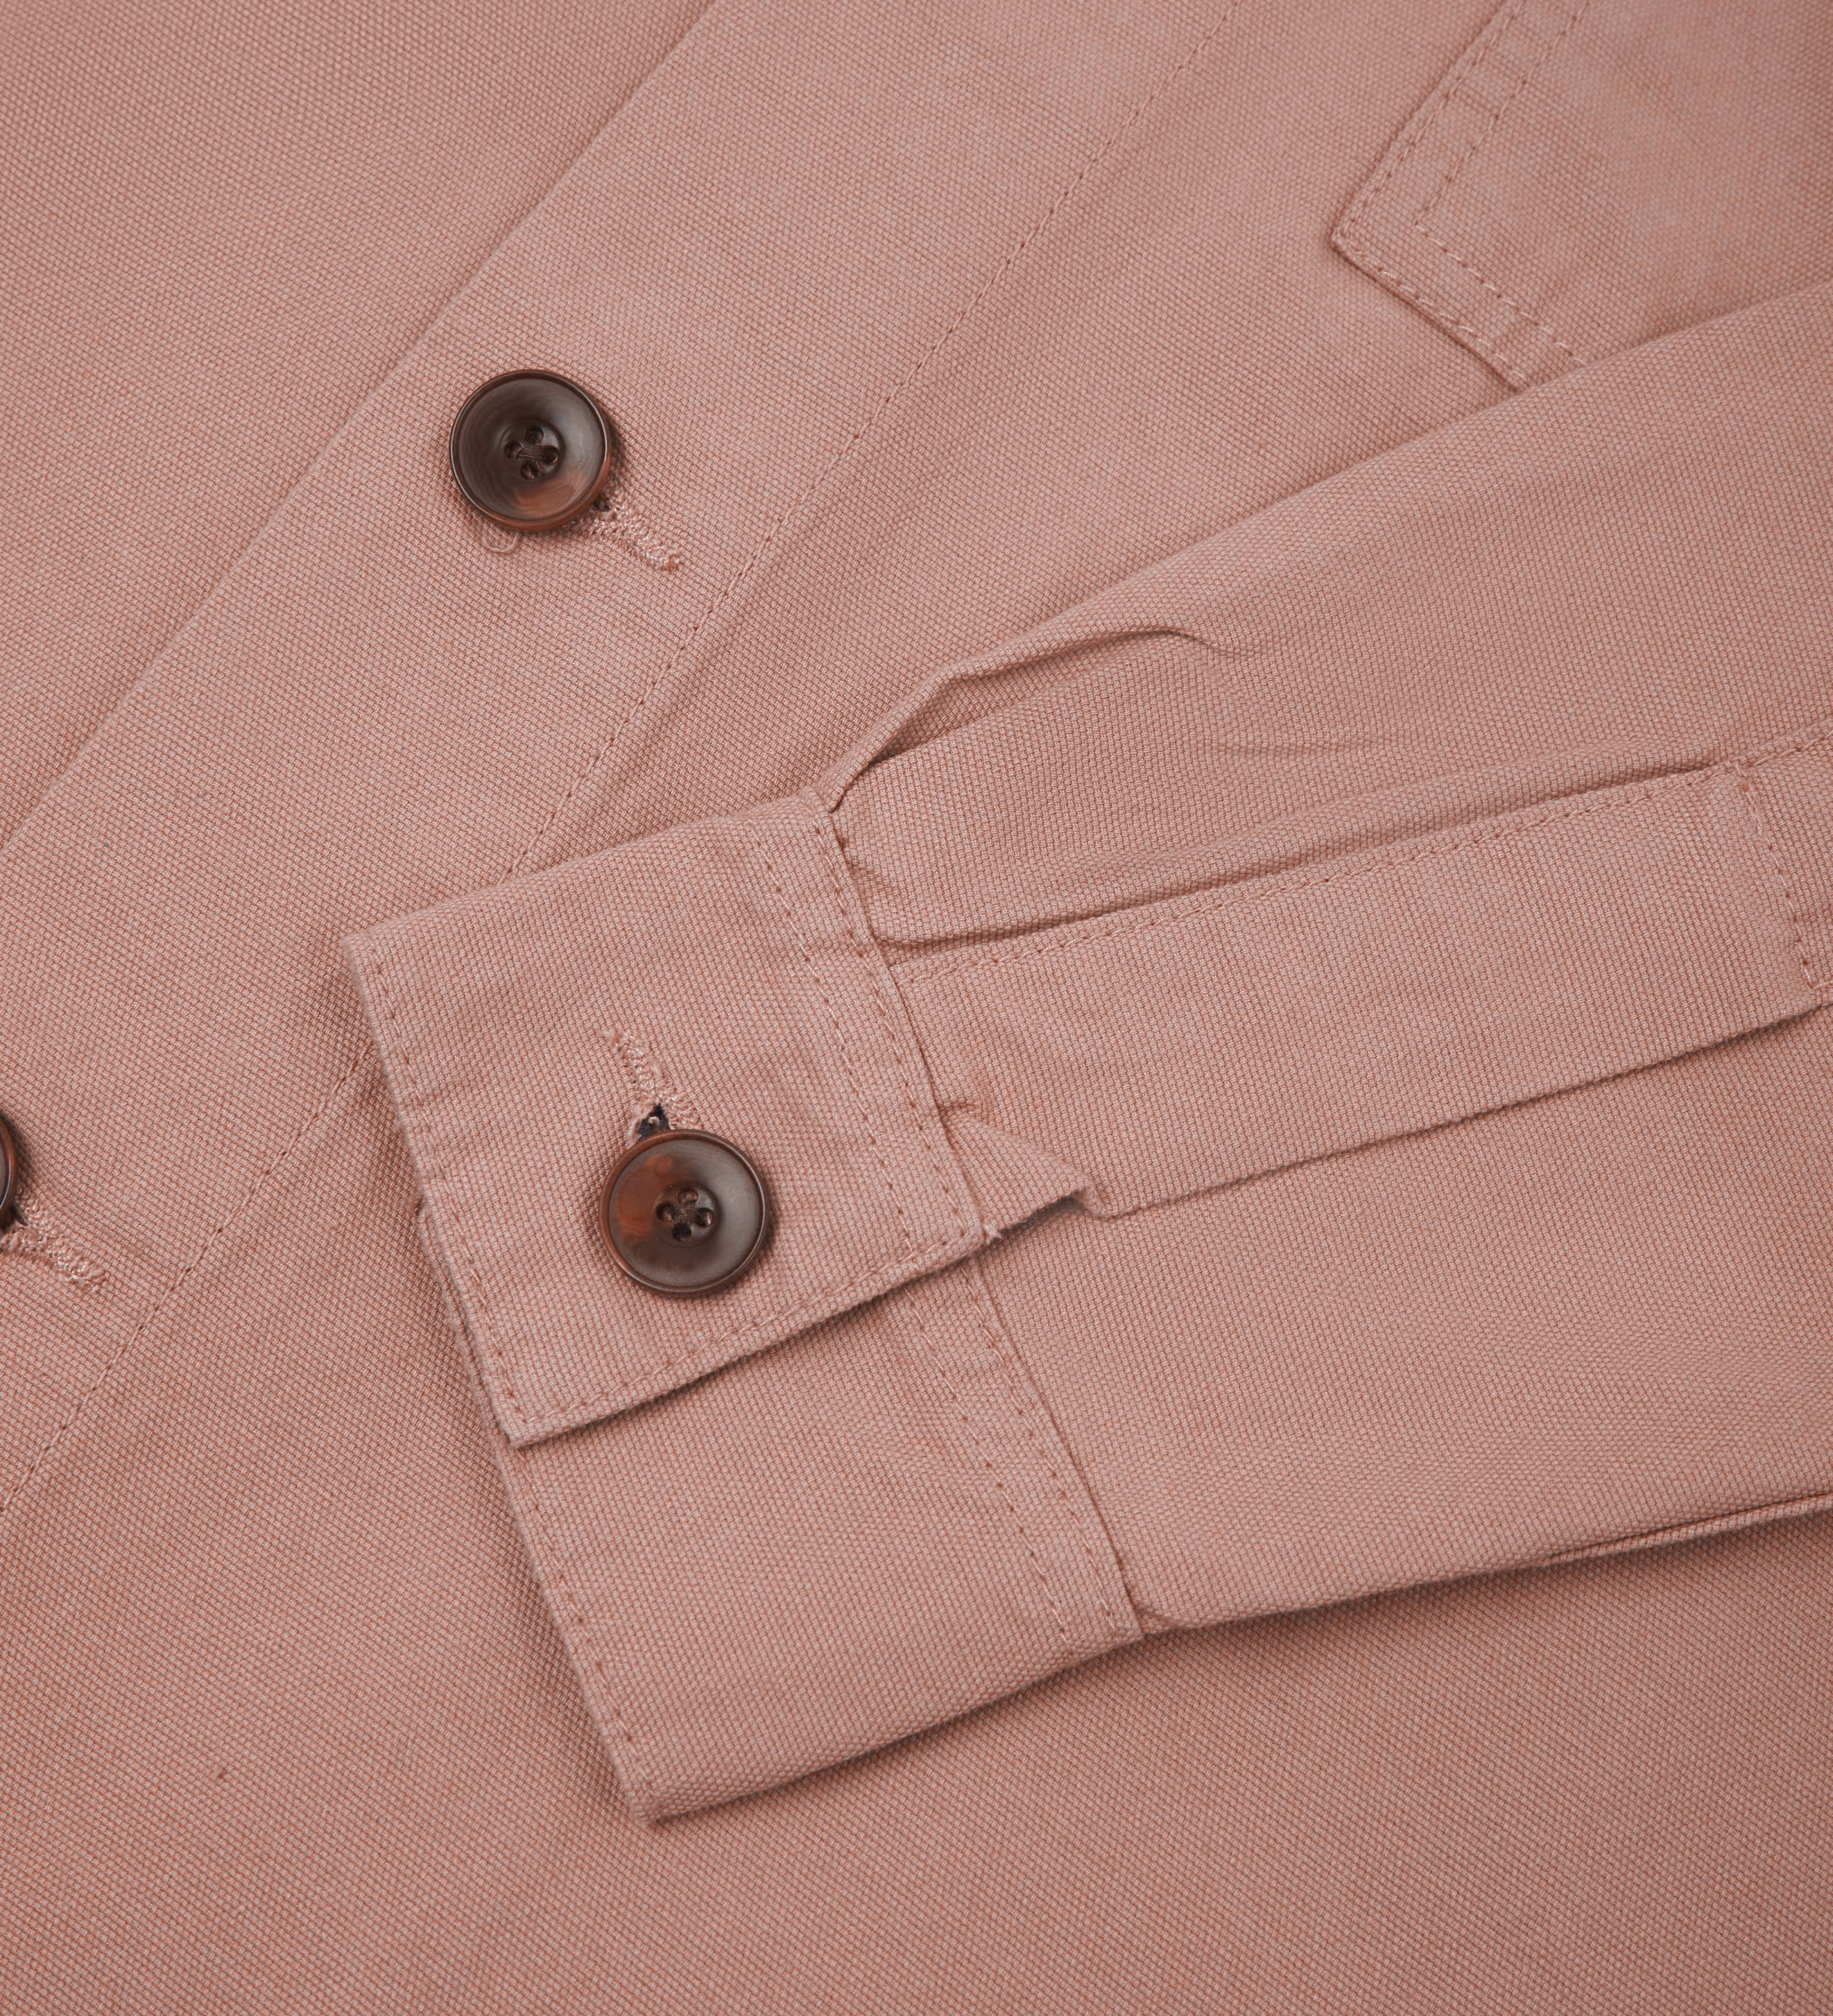 cuff detail and brown corozo buttons.